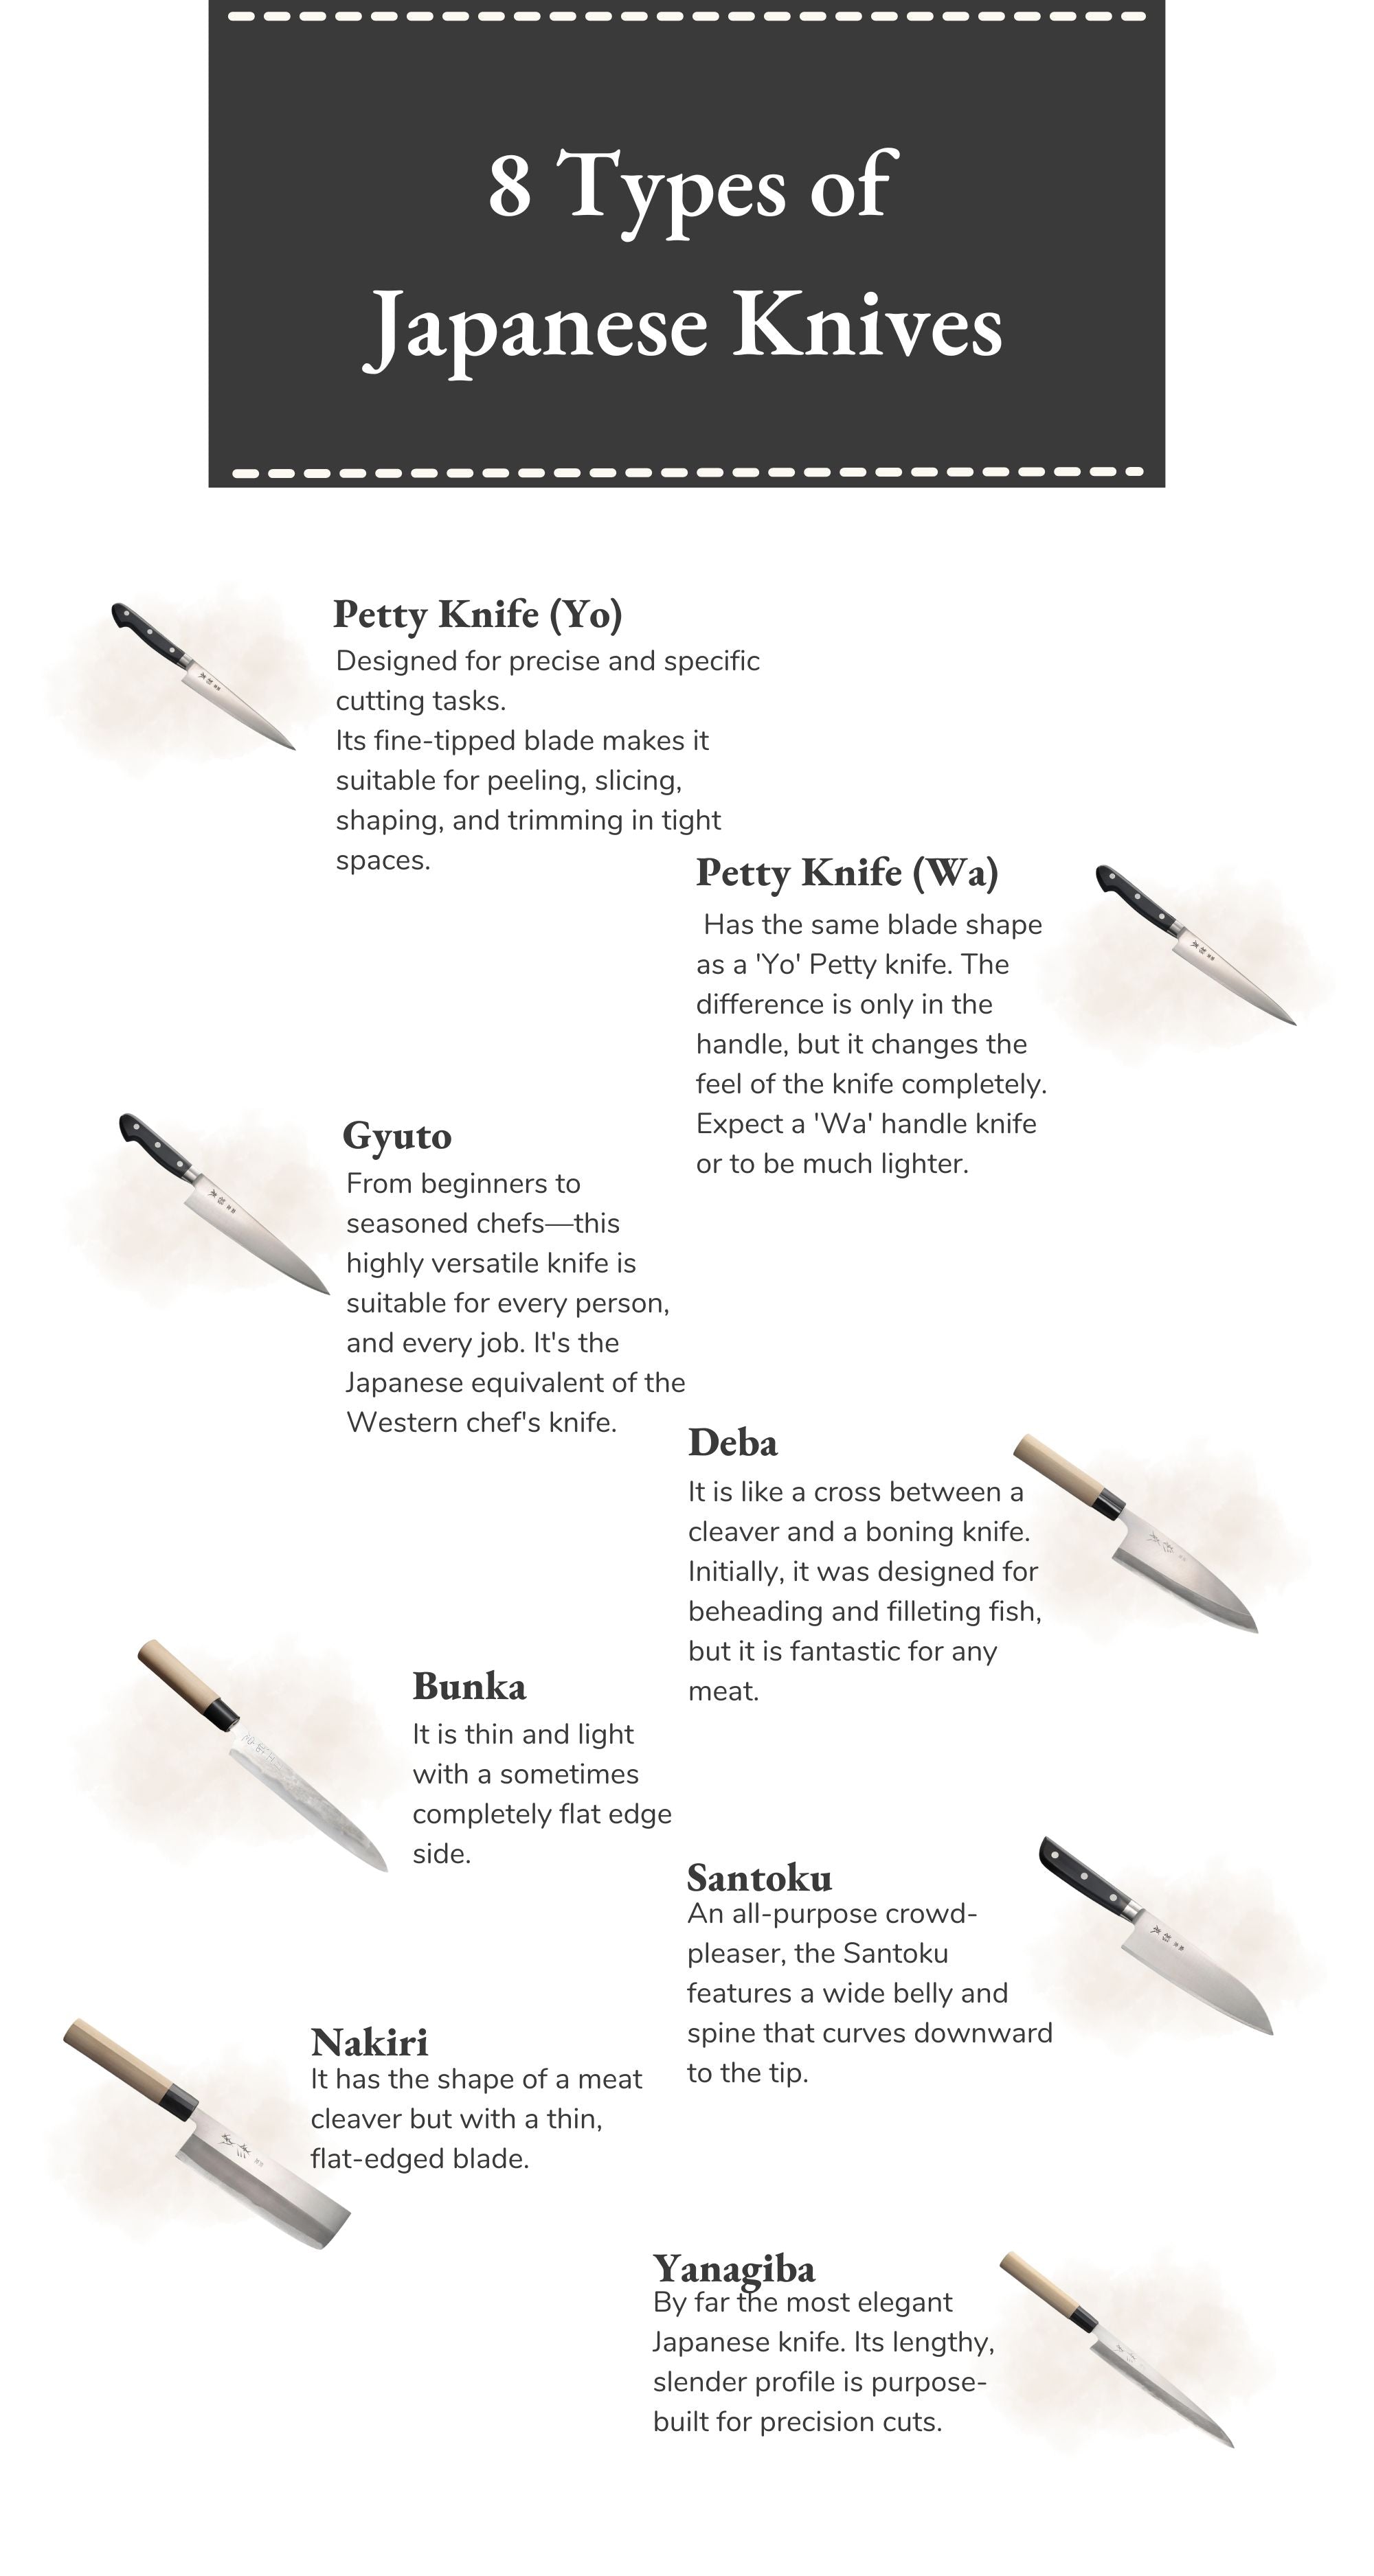 Eight types of Japanese knives.